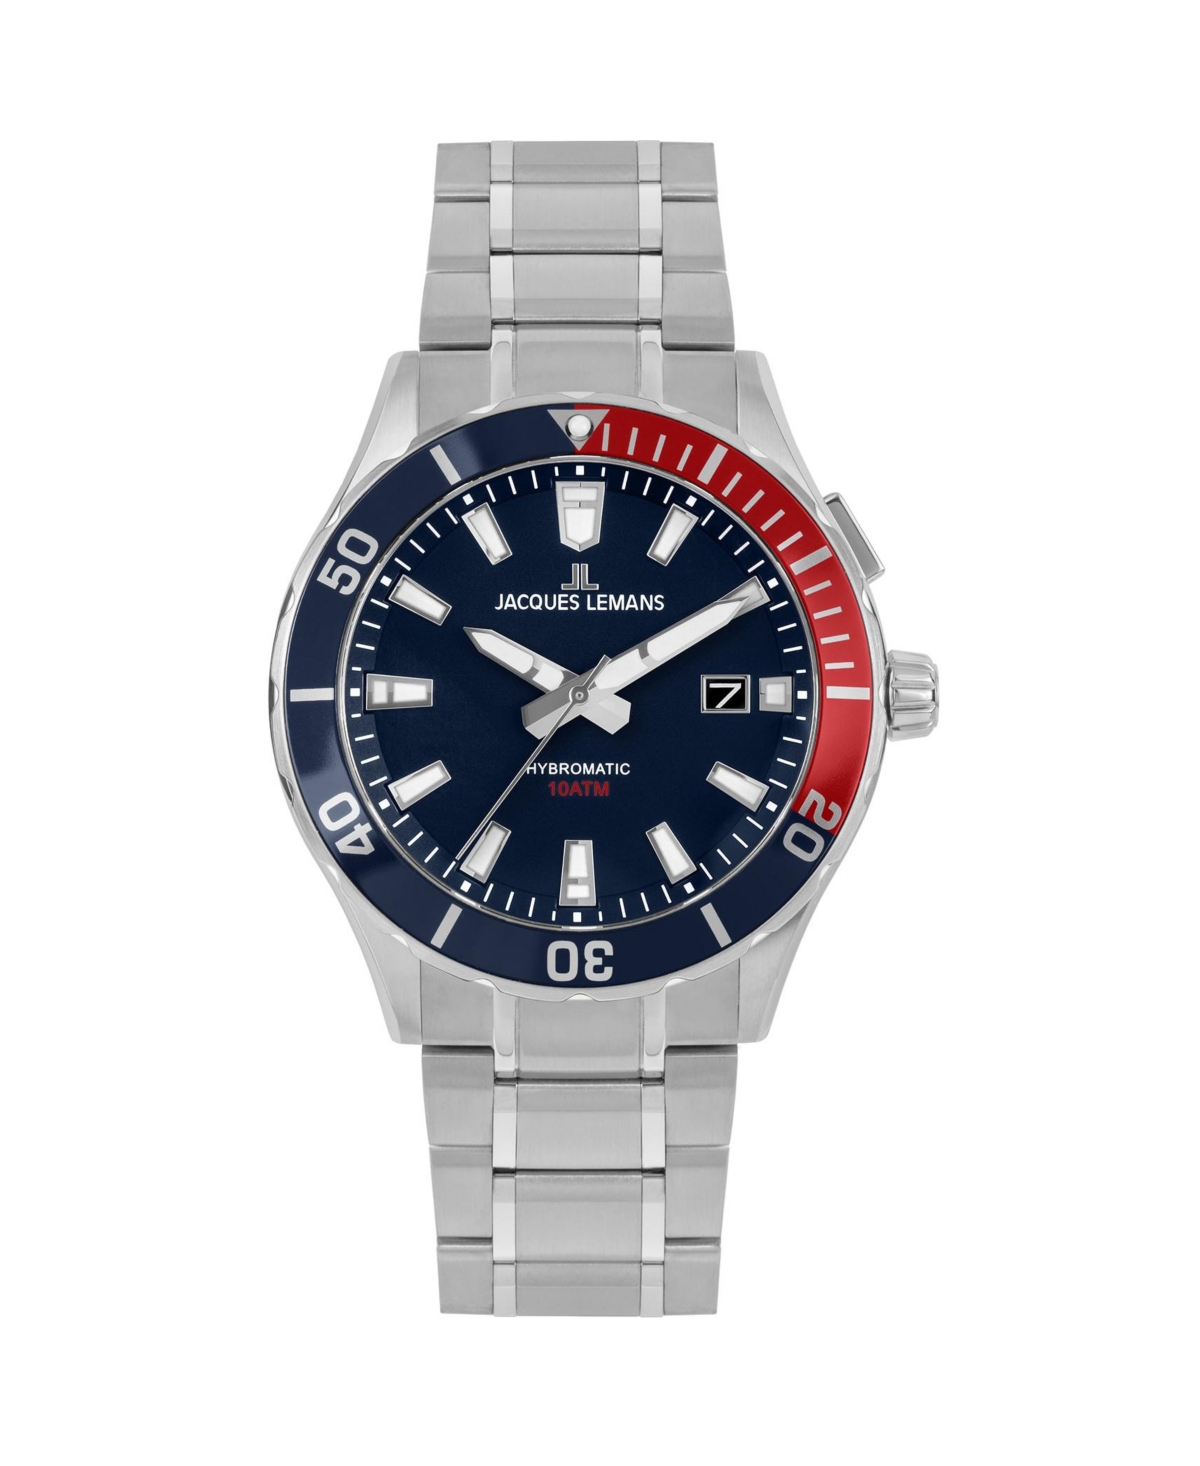 Jacques Lemans Men's Hybromatic Watch with Solid Stainless Steel Strap 1-2131  - Dark blue | Smart Closet